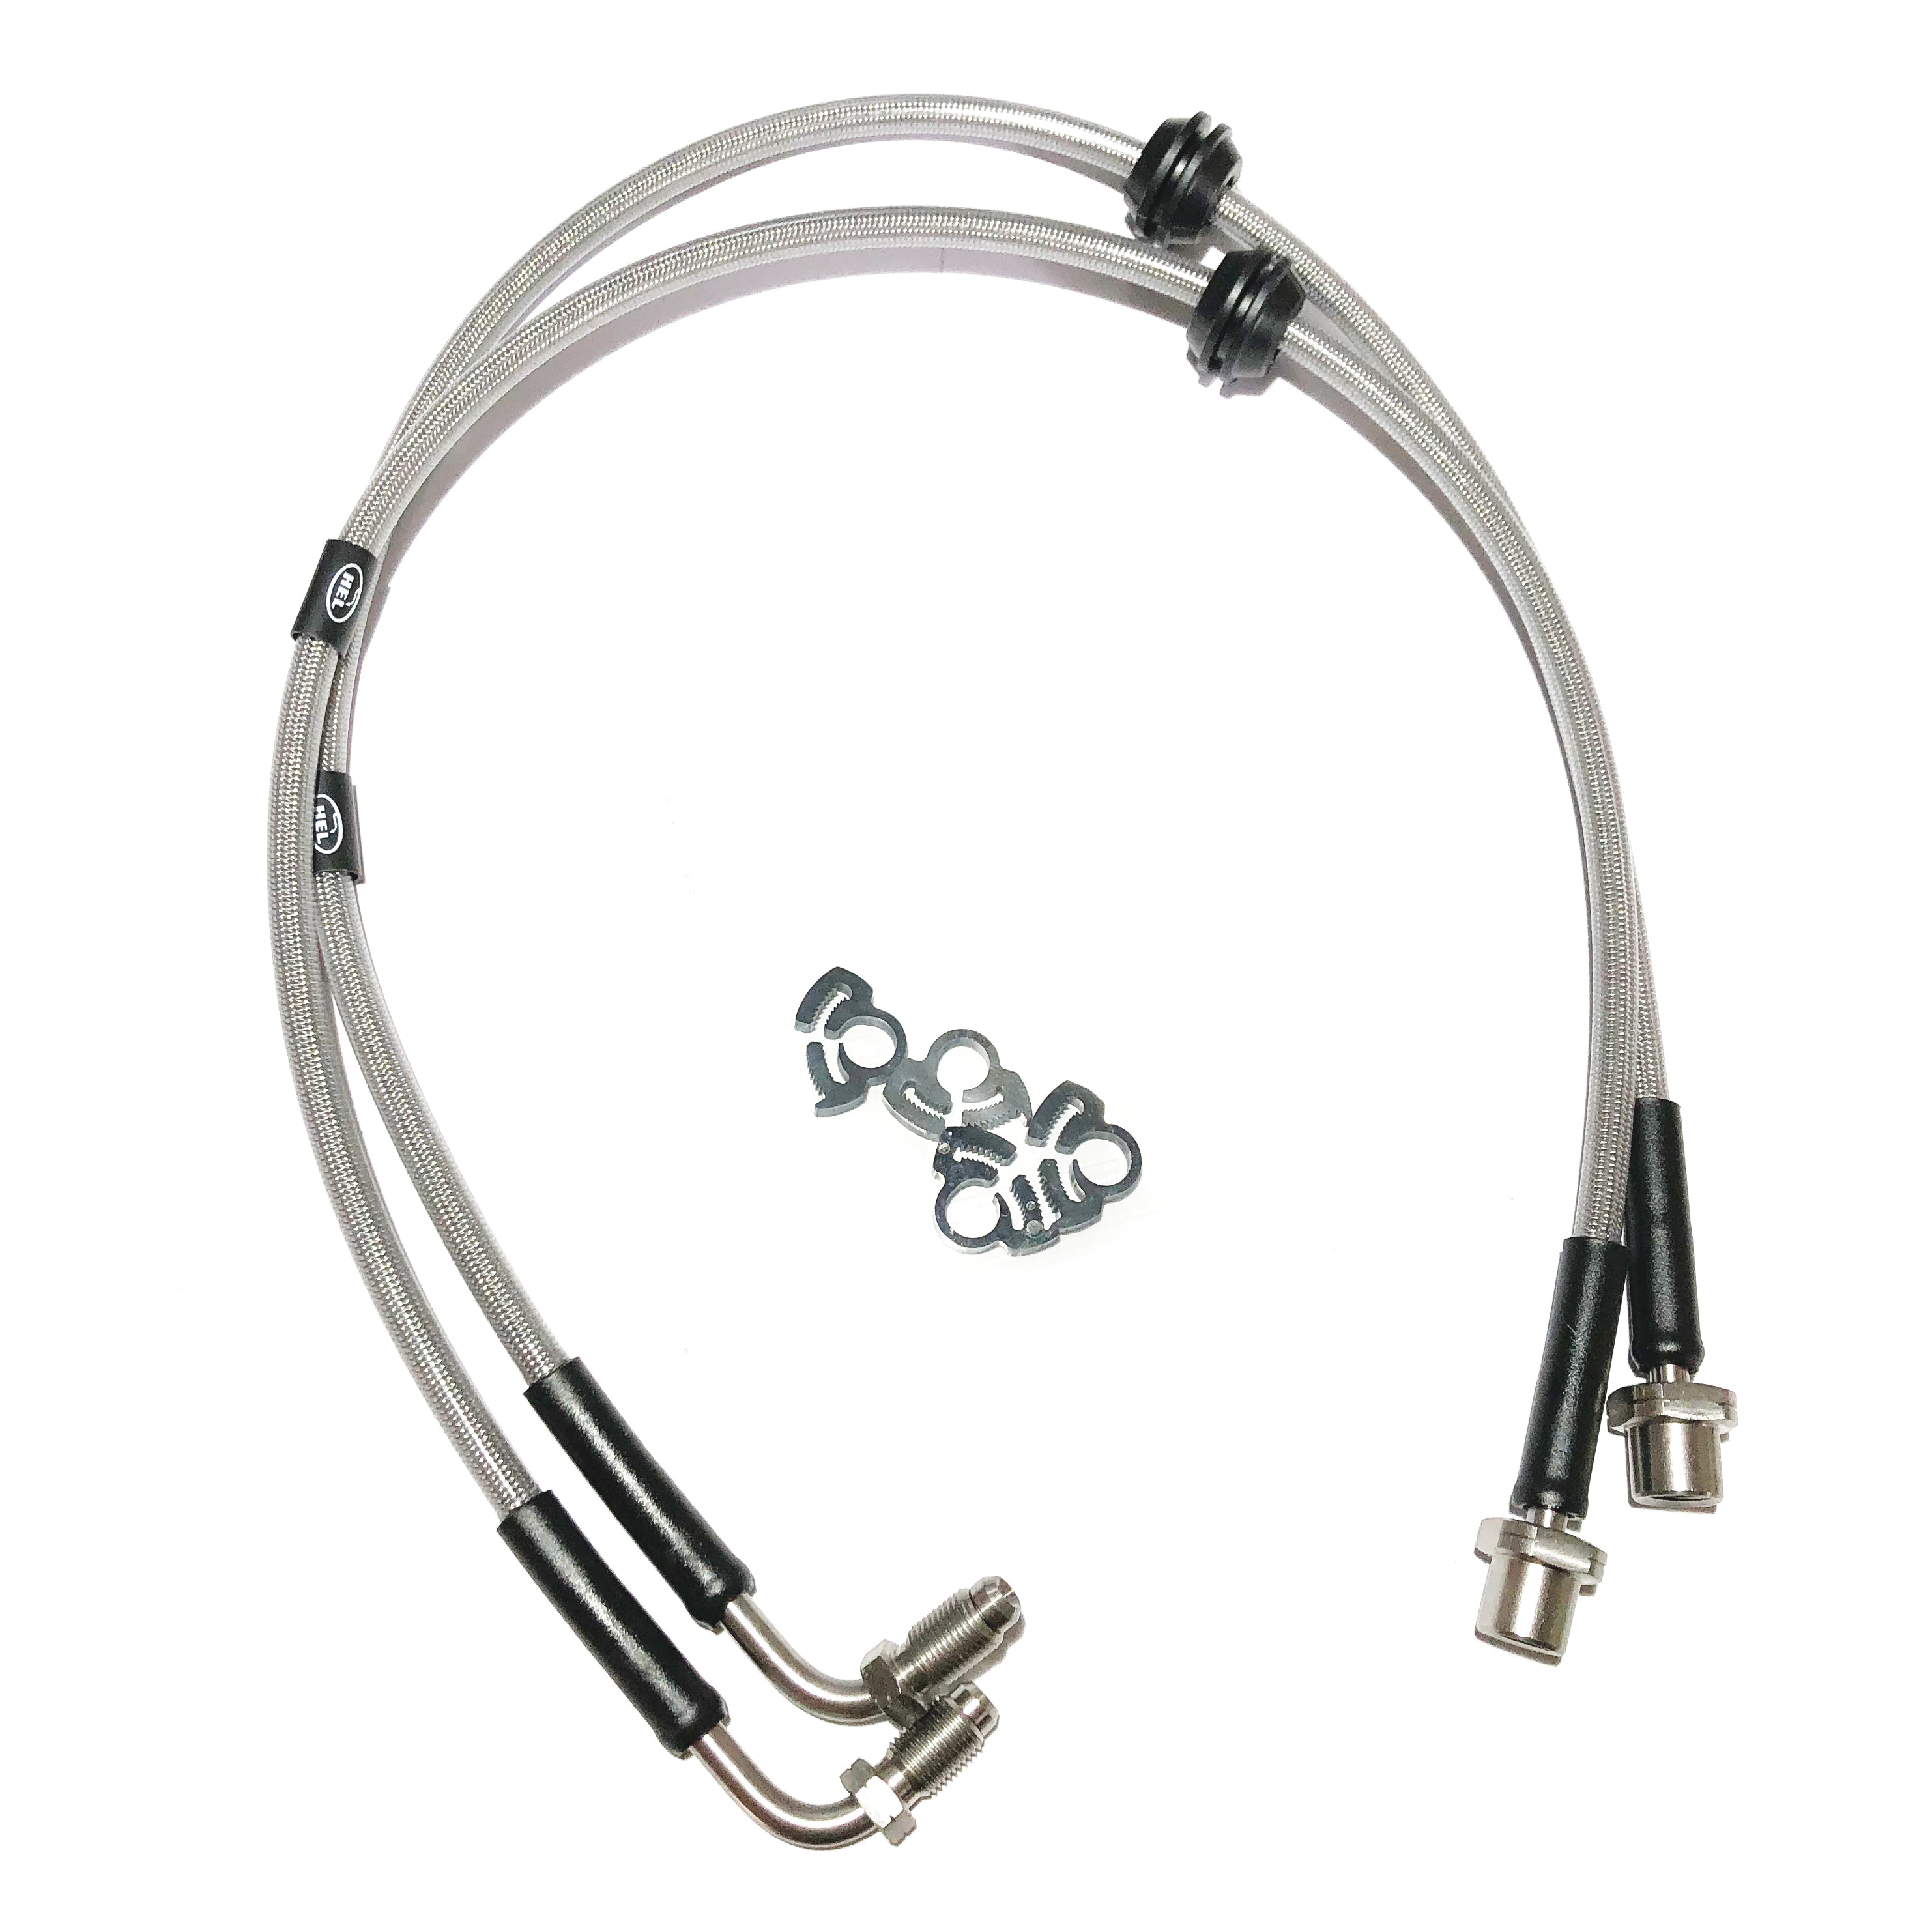 Braided Brake Hoses - Custom made by HEL to fit R53 Mini with Brembo Calipers